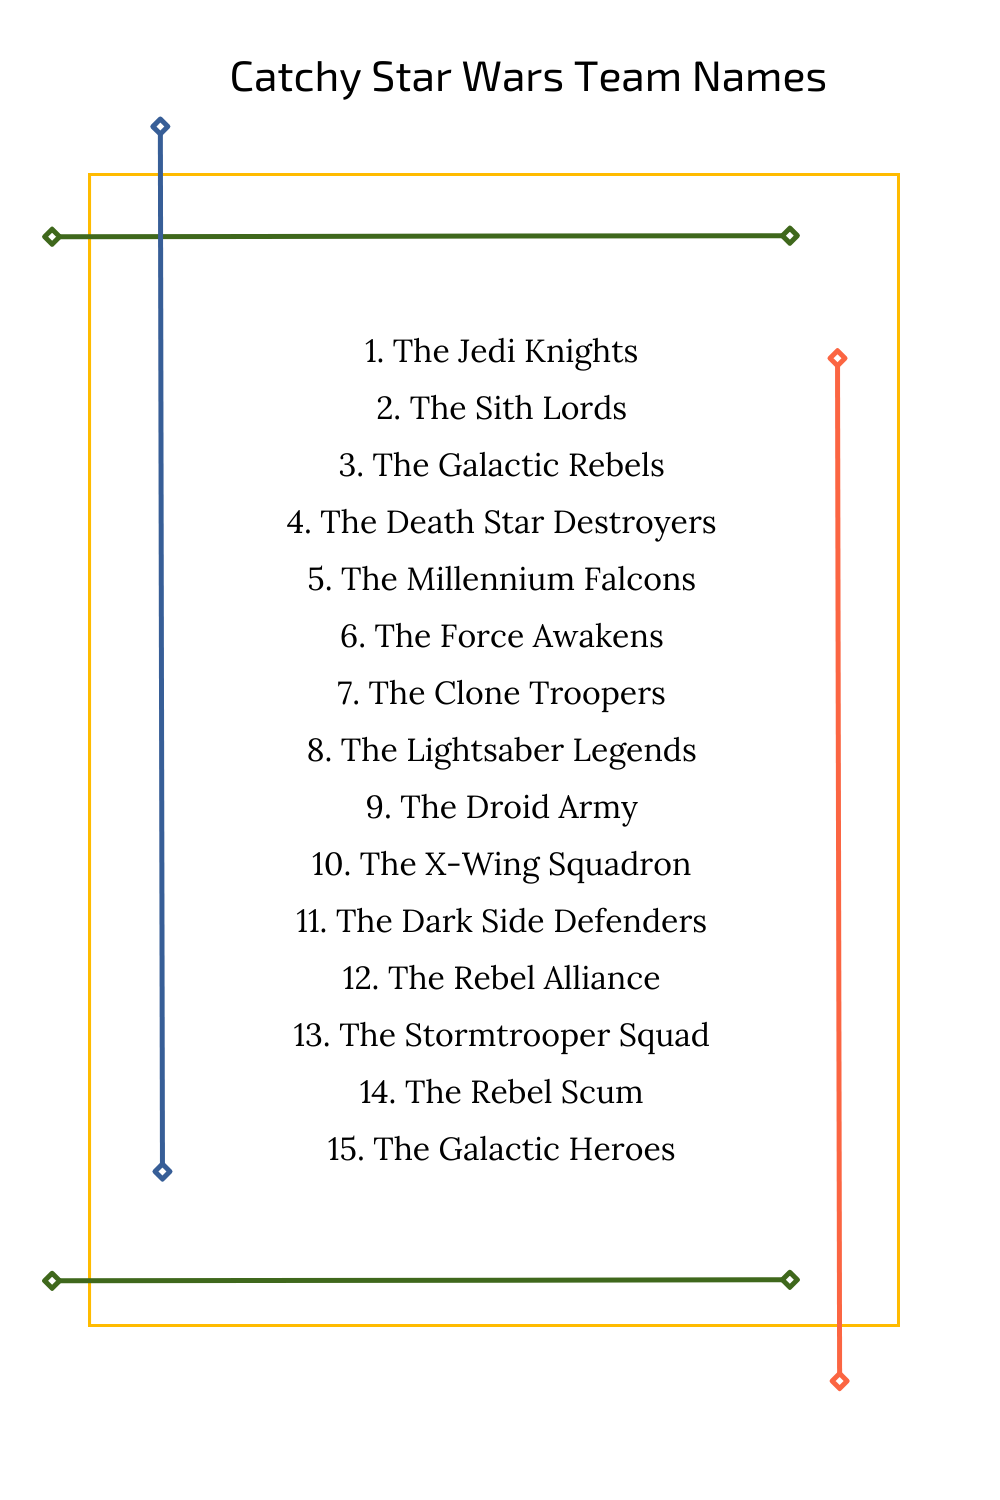 Catchy Star Wars Team Names